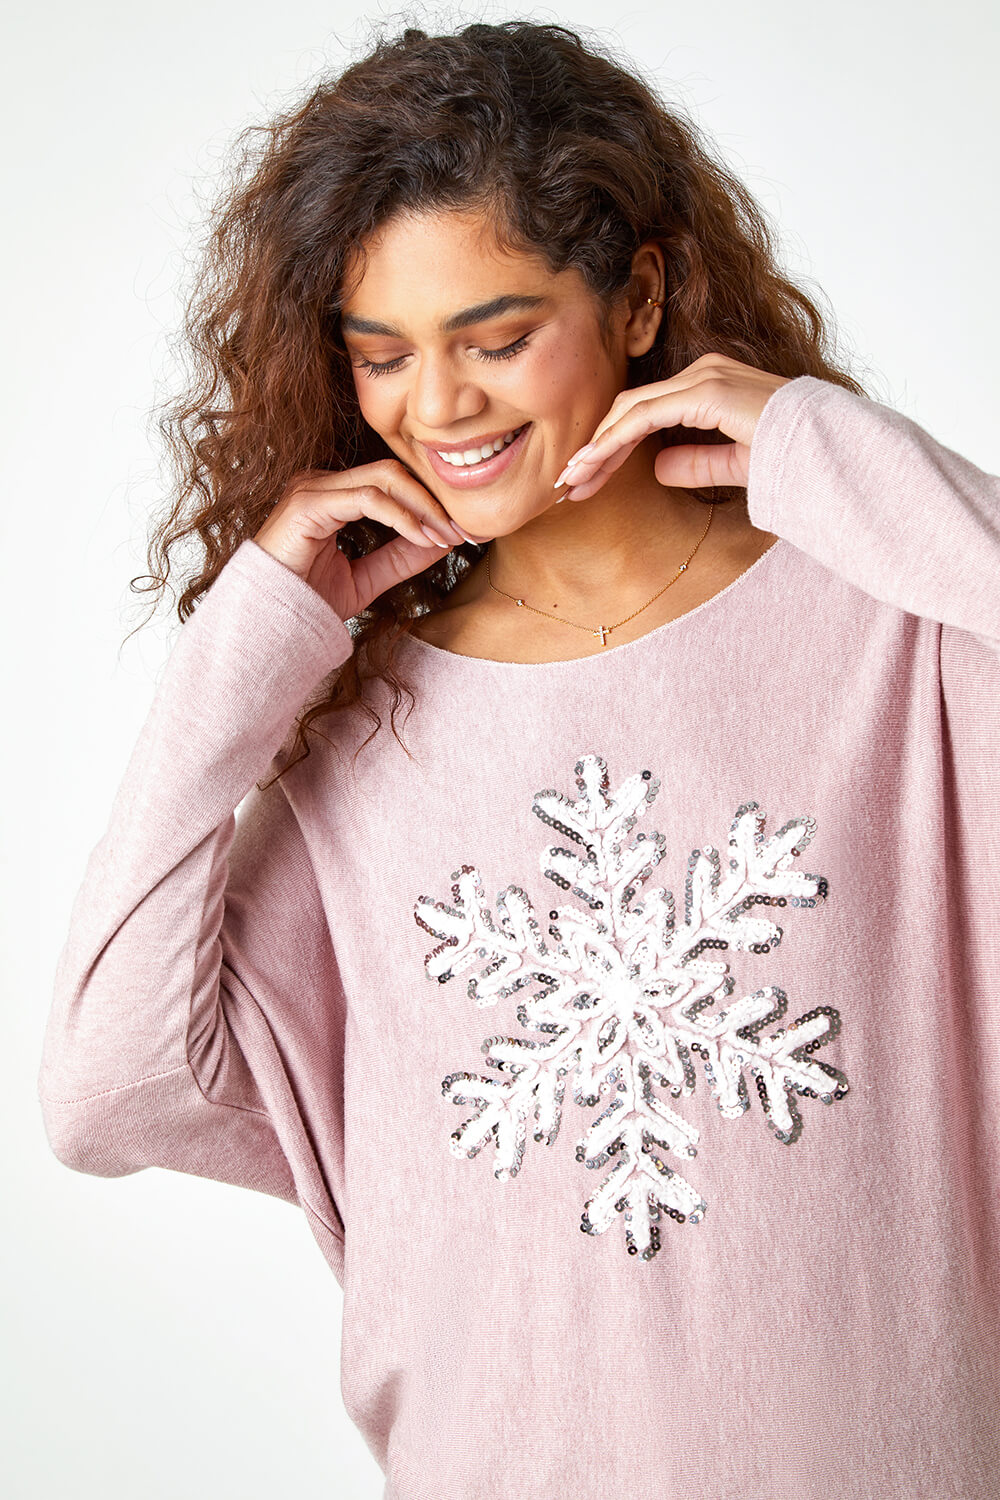 Embellished Snowflake Stretch Top